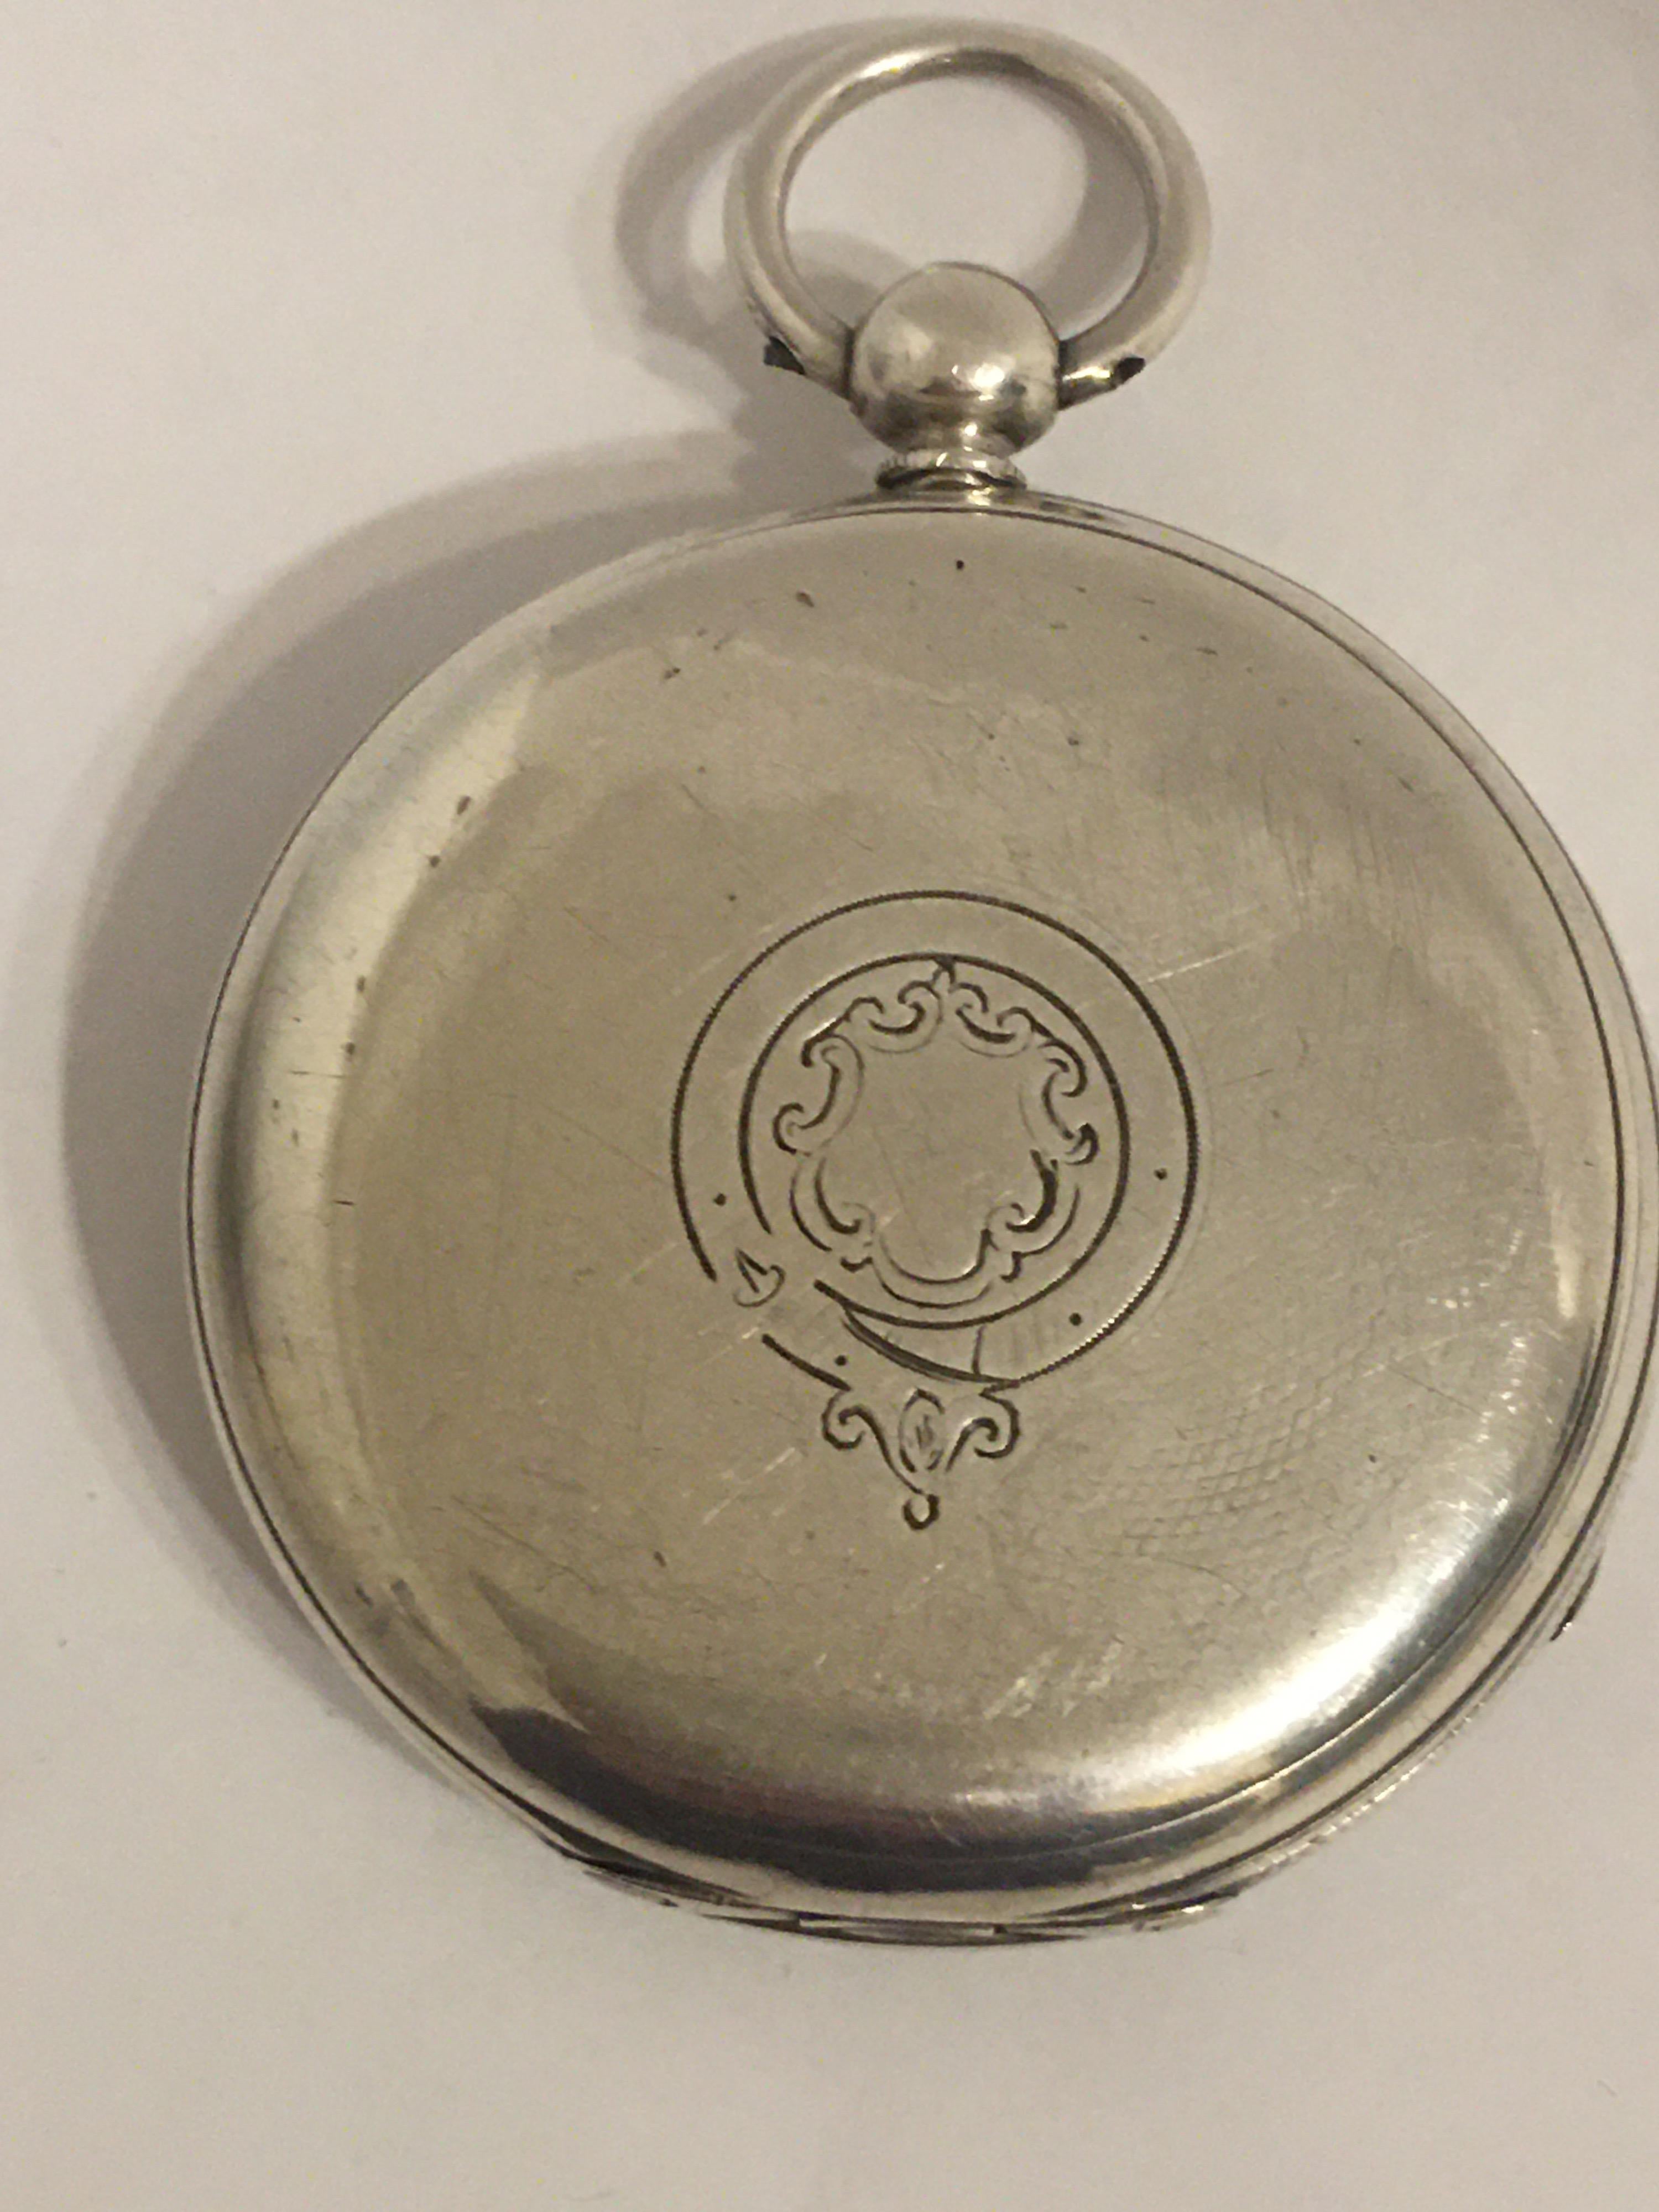 This beautiful silver pocket watch is in good working condition and is running well.